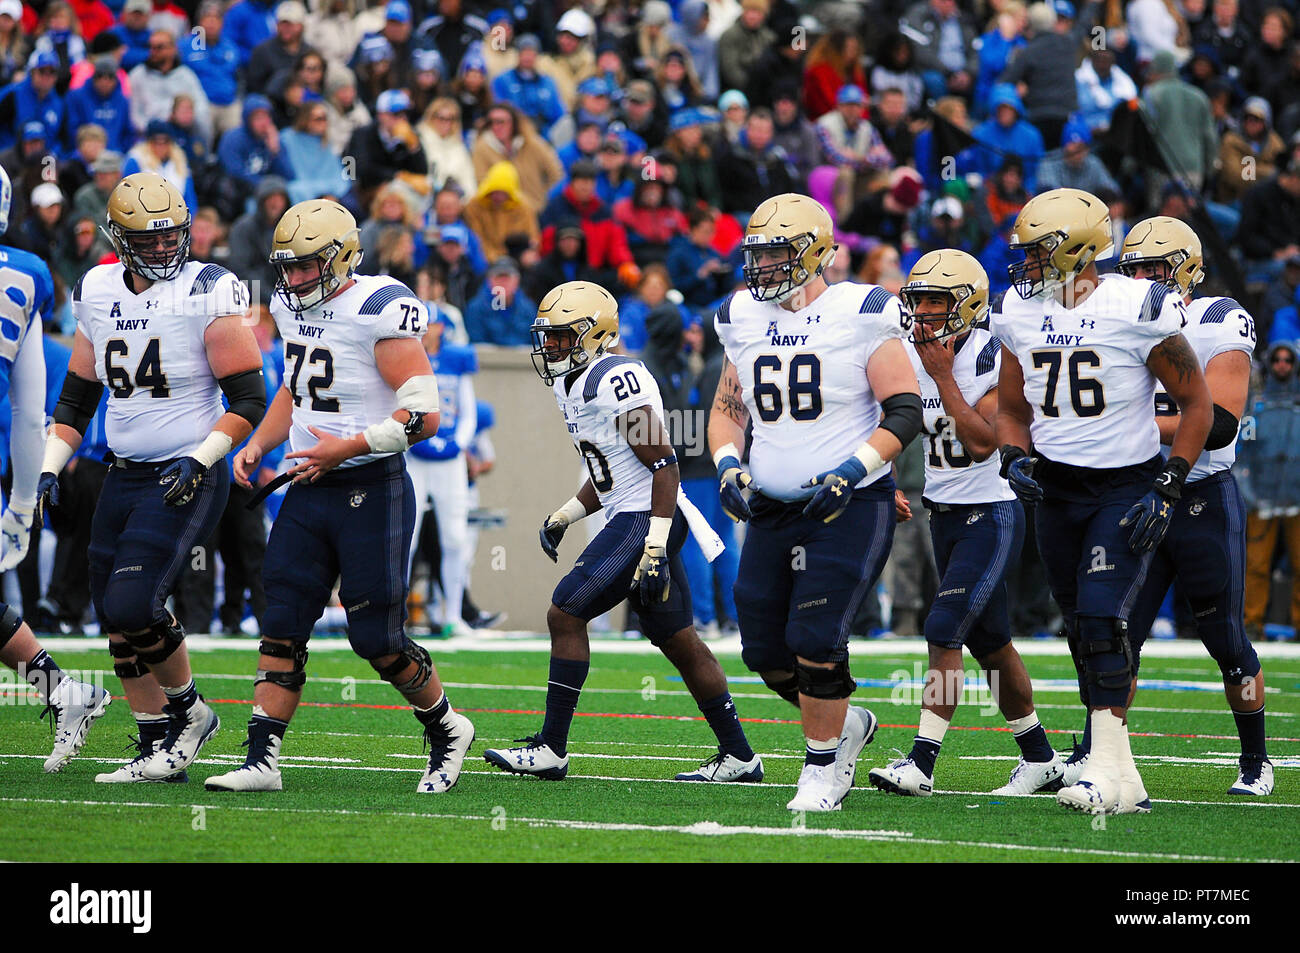 october-6-2018-navy-offensive-linemen-during-the-ncaa-football-game-between-the-navy-midshipmen-and-the-air-force-falcons-at-falcon-stadium-united-states-air-force-academy-colorado-springs-colorado-air-force-defeats-navy-35-7-PT7MEC.jpg